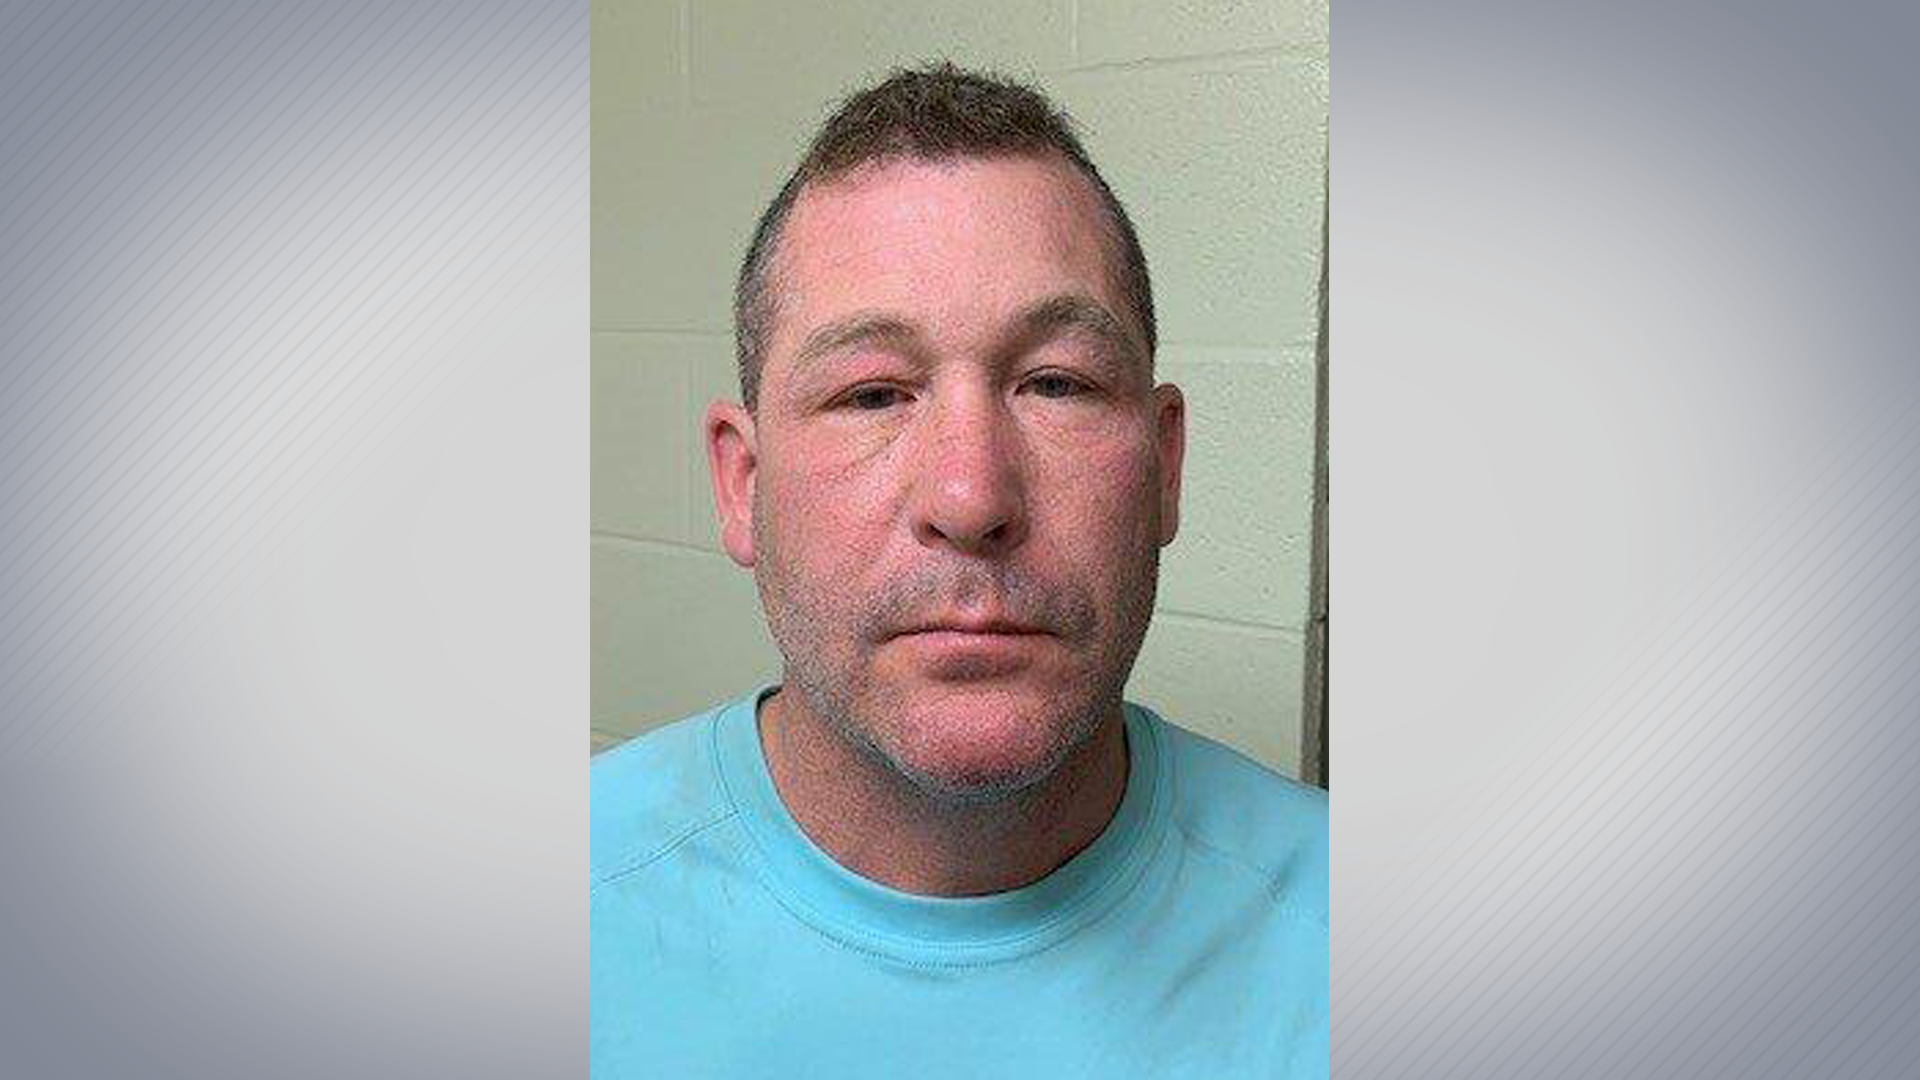 Det. Scott Aldridge is charged with driving while intoxicated with a child passenger. Bond was set at $2,000.